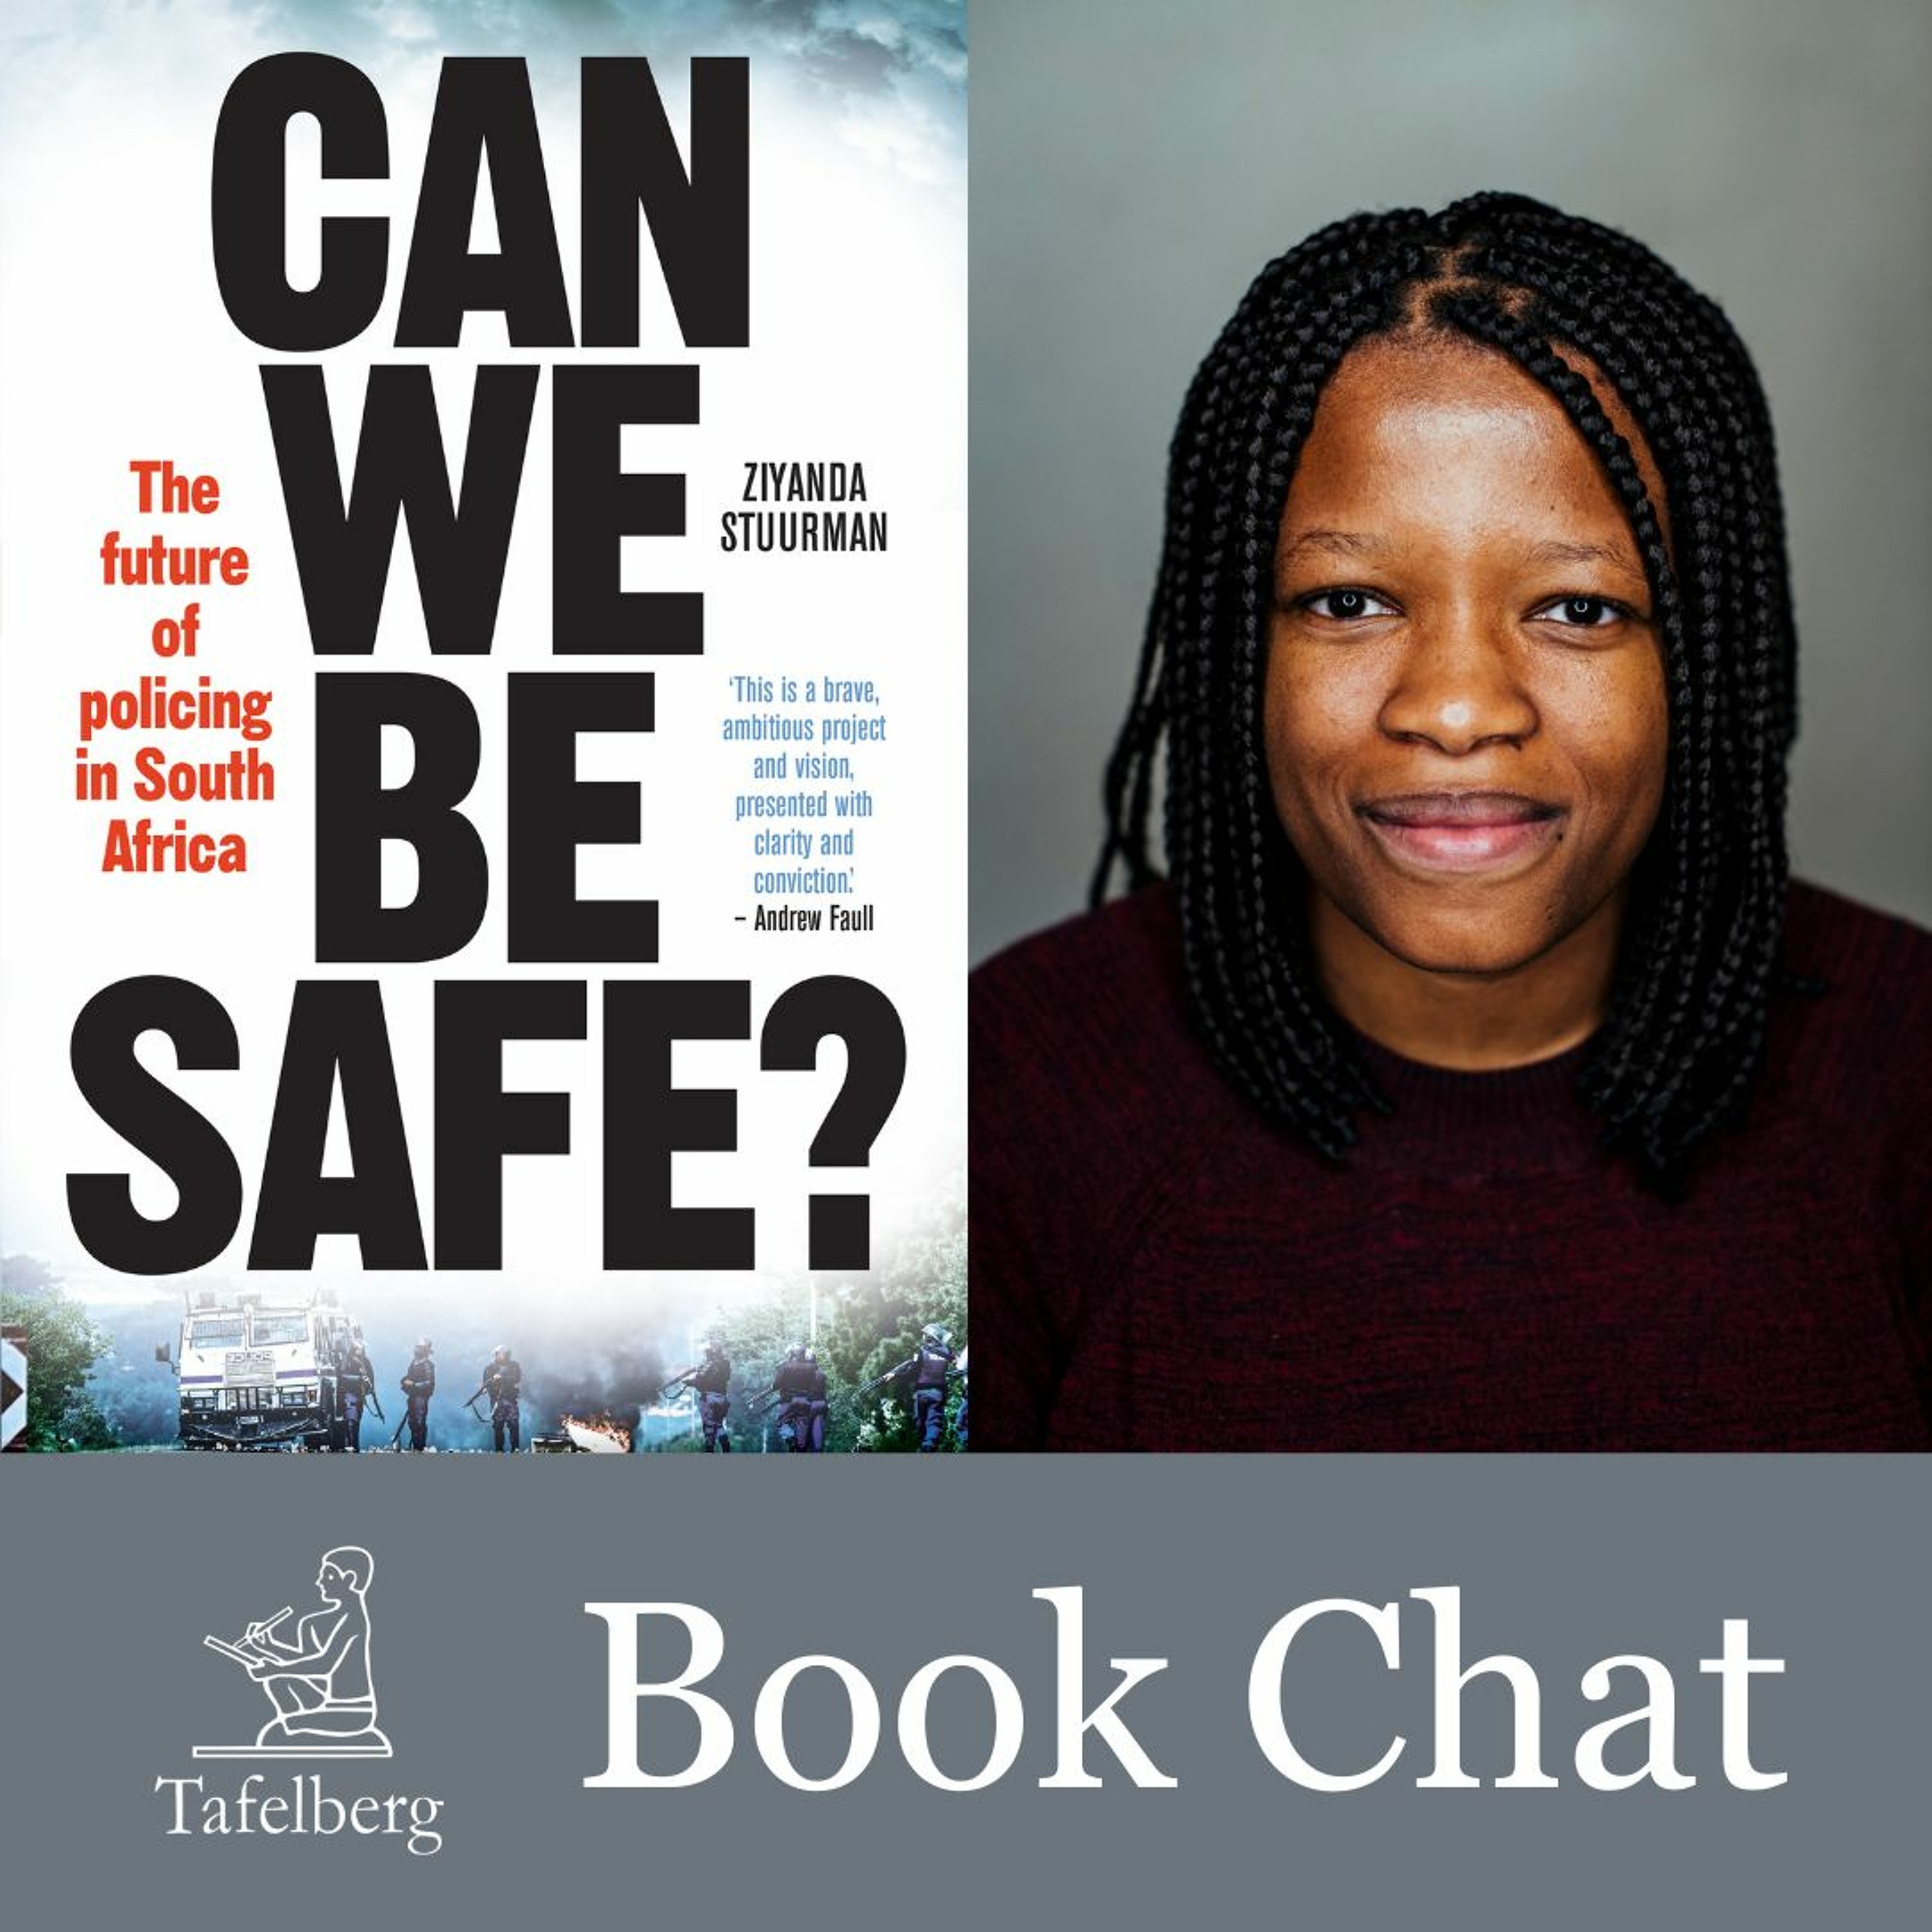 Tafelberg Book Chat: Can We Be Safe? by Ziyanda Stuurman with Jonny Steinberg